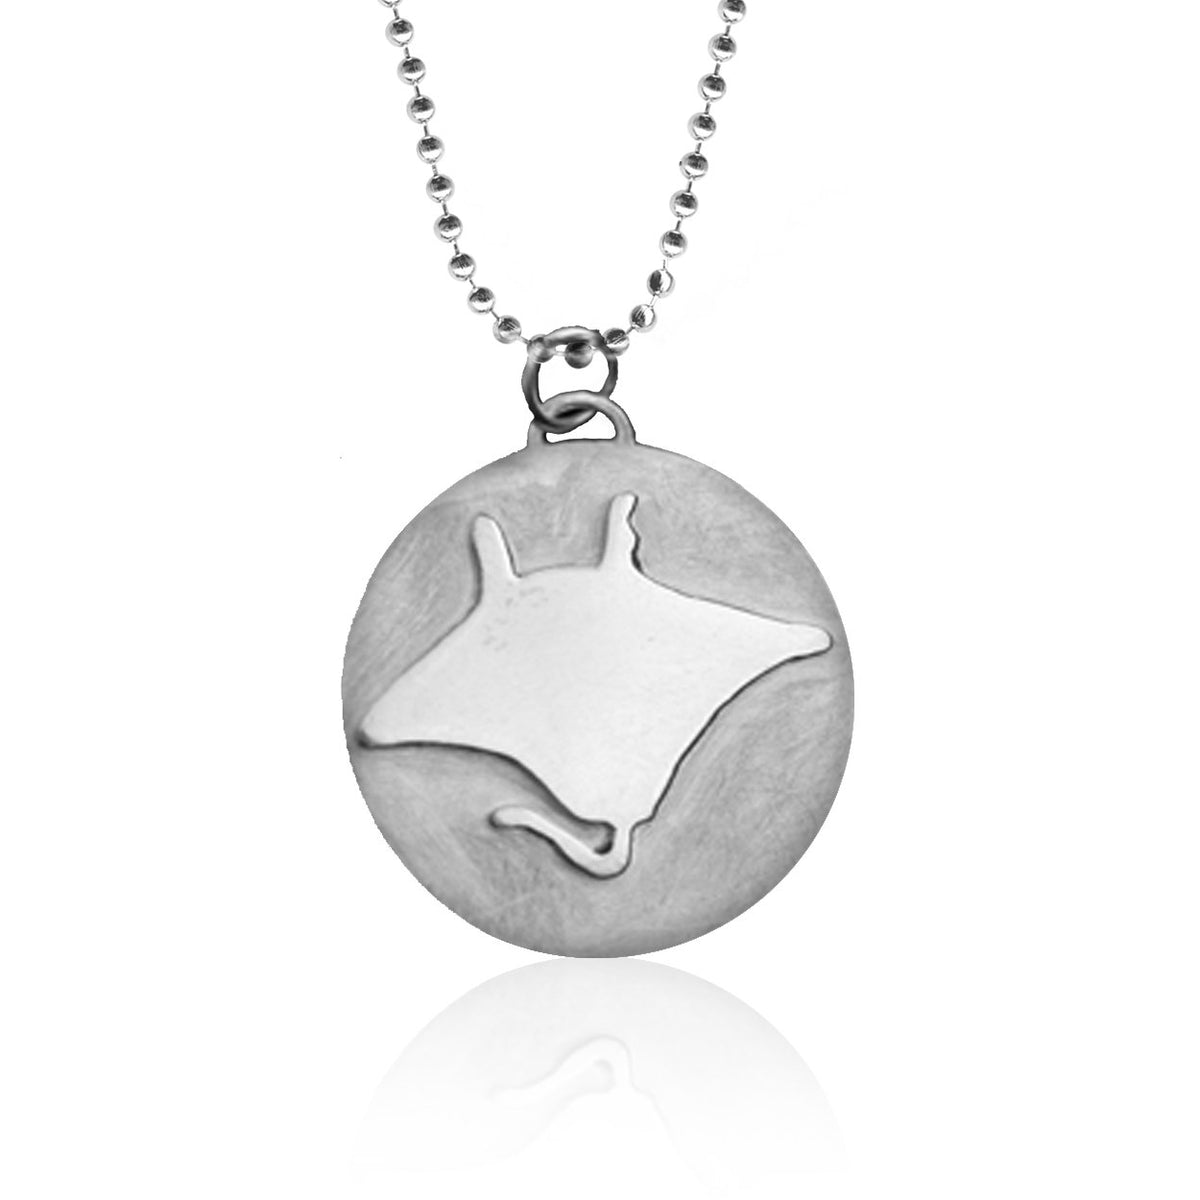 Sterling Silver Ocean Inspired Manta Ray Necklace from the Miss Scuba Jewelry Collection.